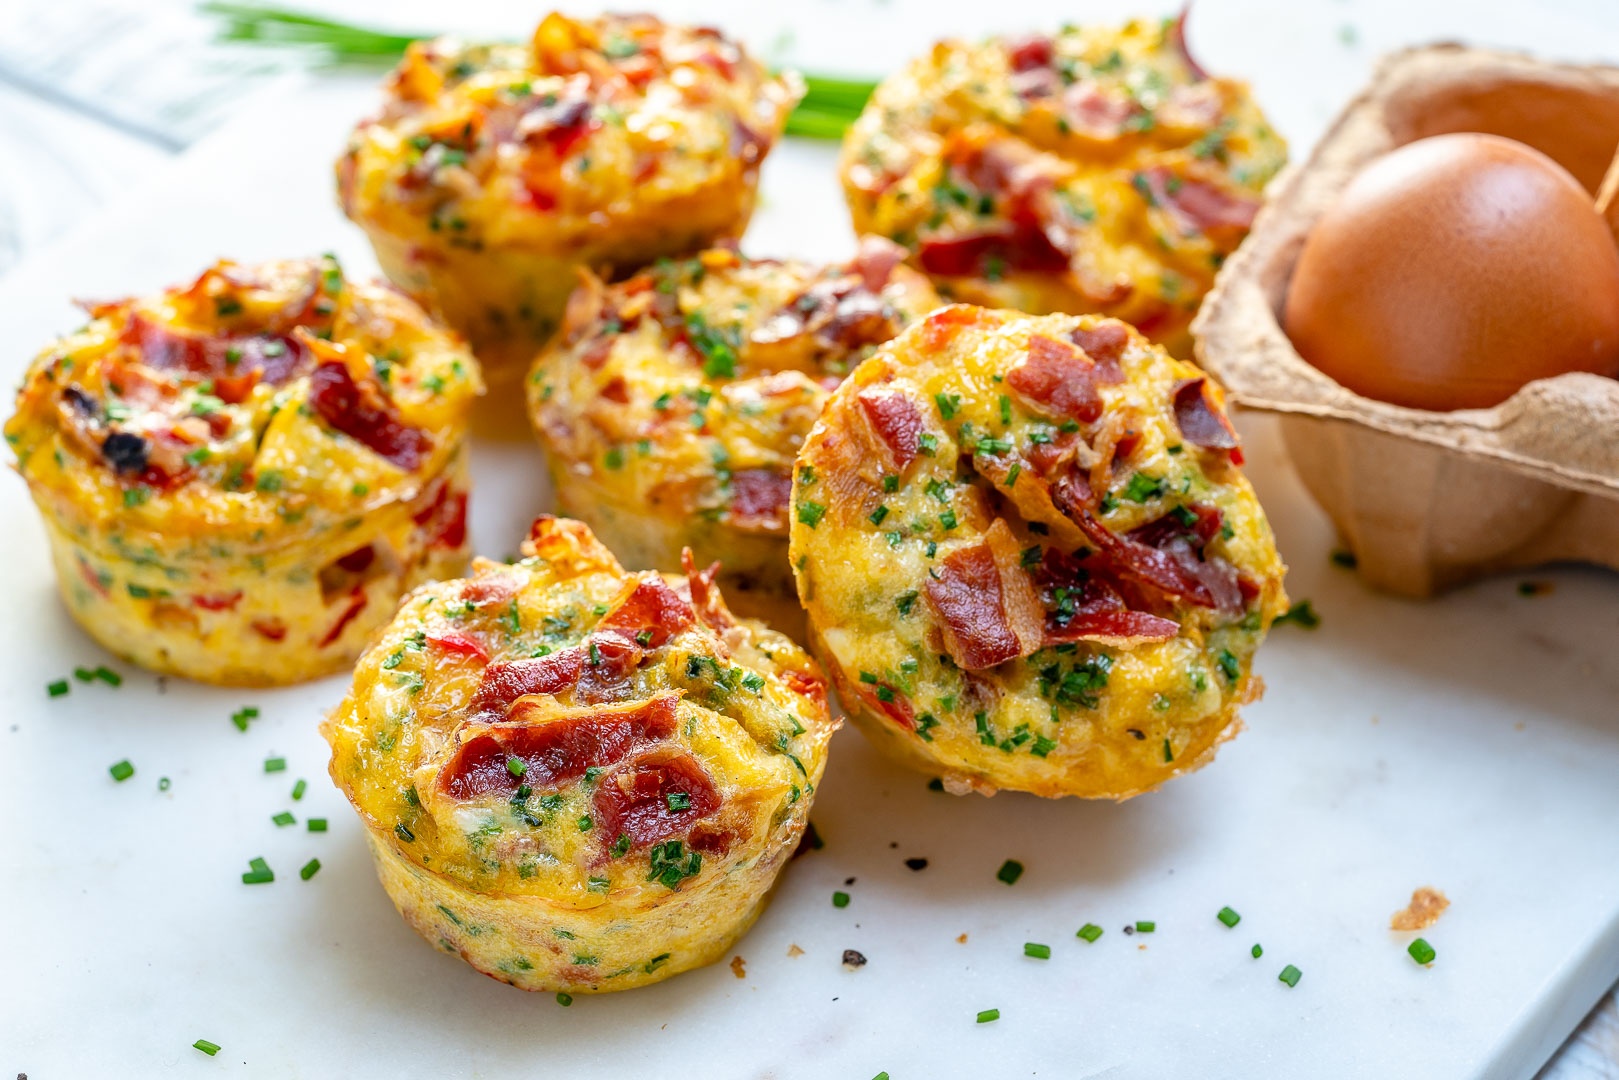 https://cleanfoodcrush.com/wp-content/uploads/2018/12/Bacon-Egg-Muffins-by-CleanFoodCrush.jpg